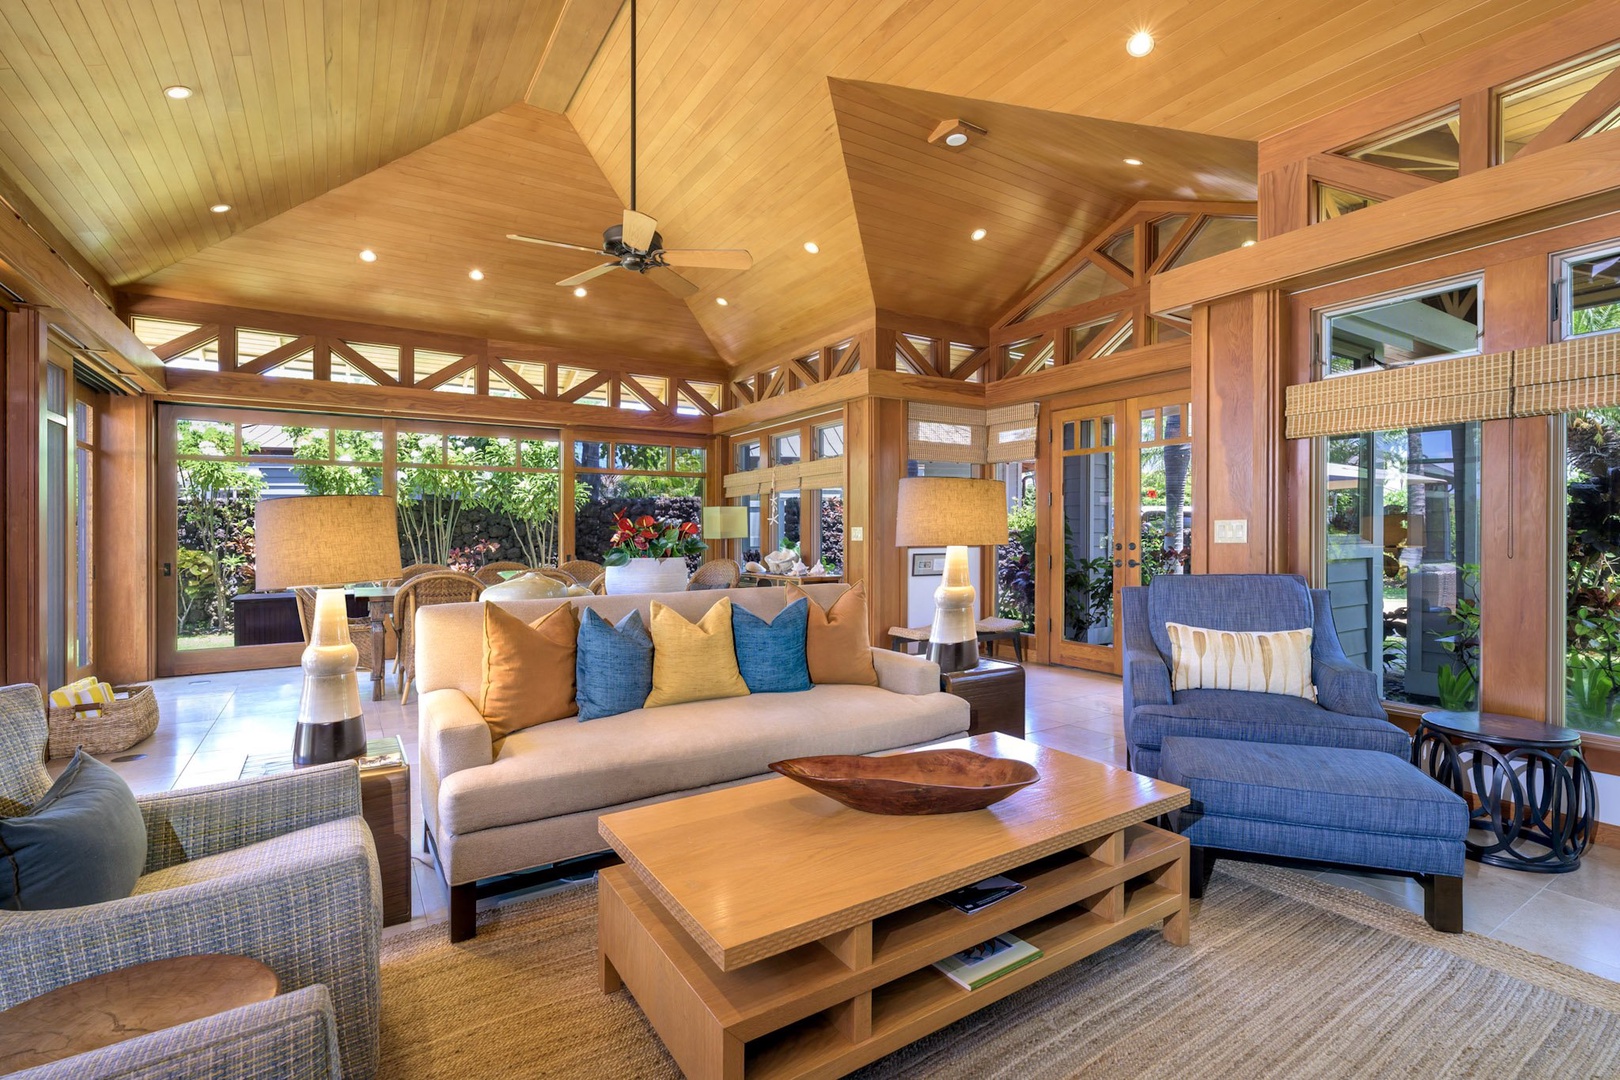 Kamuela Vacation Rentals, 3BD Na Hale 3 at Pauoa Beach Club at Mauna Lani Resort - The heart of the home, the open living area, boasts comfortable furnishings set under natural wood vaulted ceilings, amplifying the sense of space and warmth.